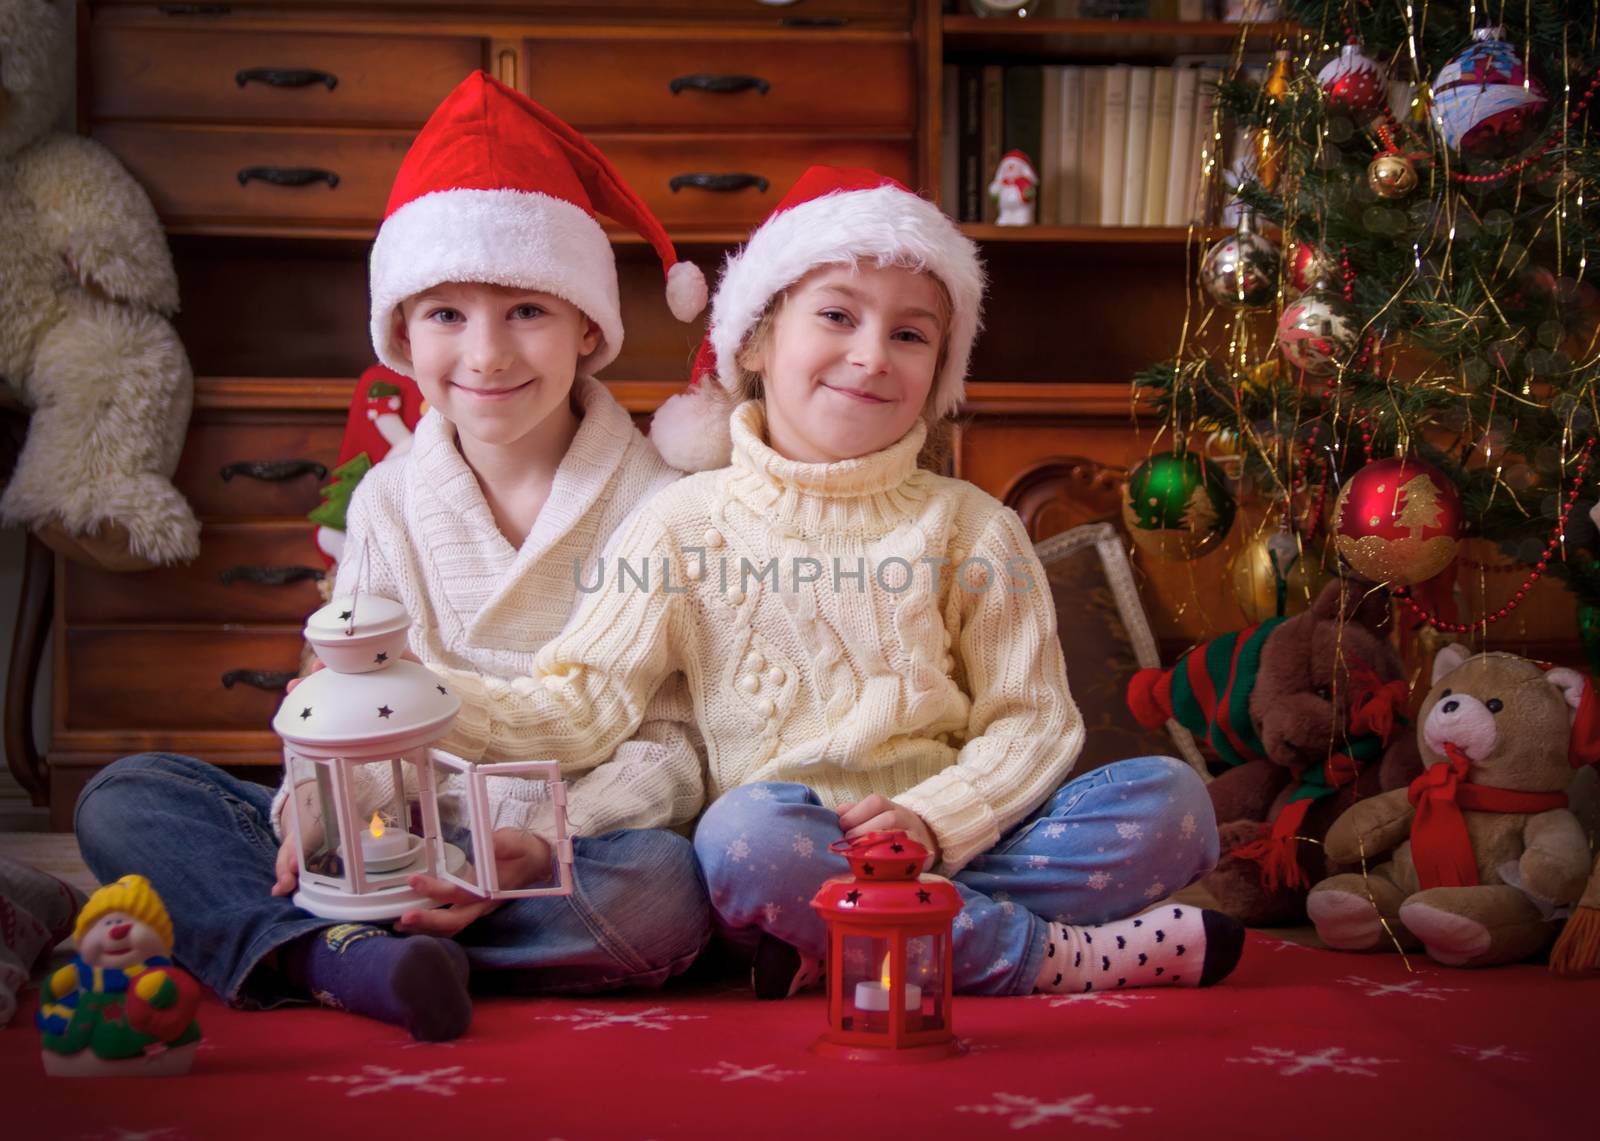 Two kids playing with lanterns under Christmas tree by Angel_a